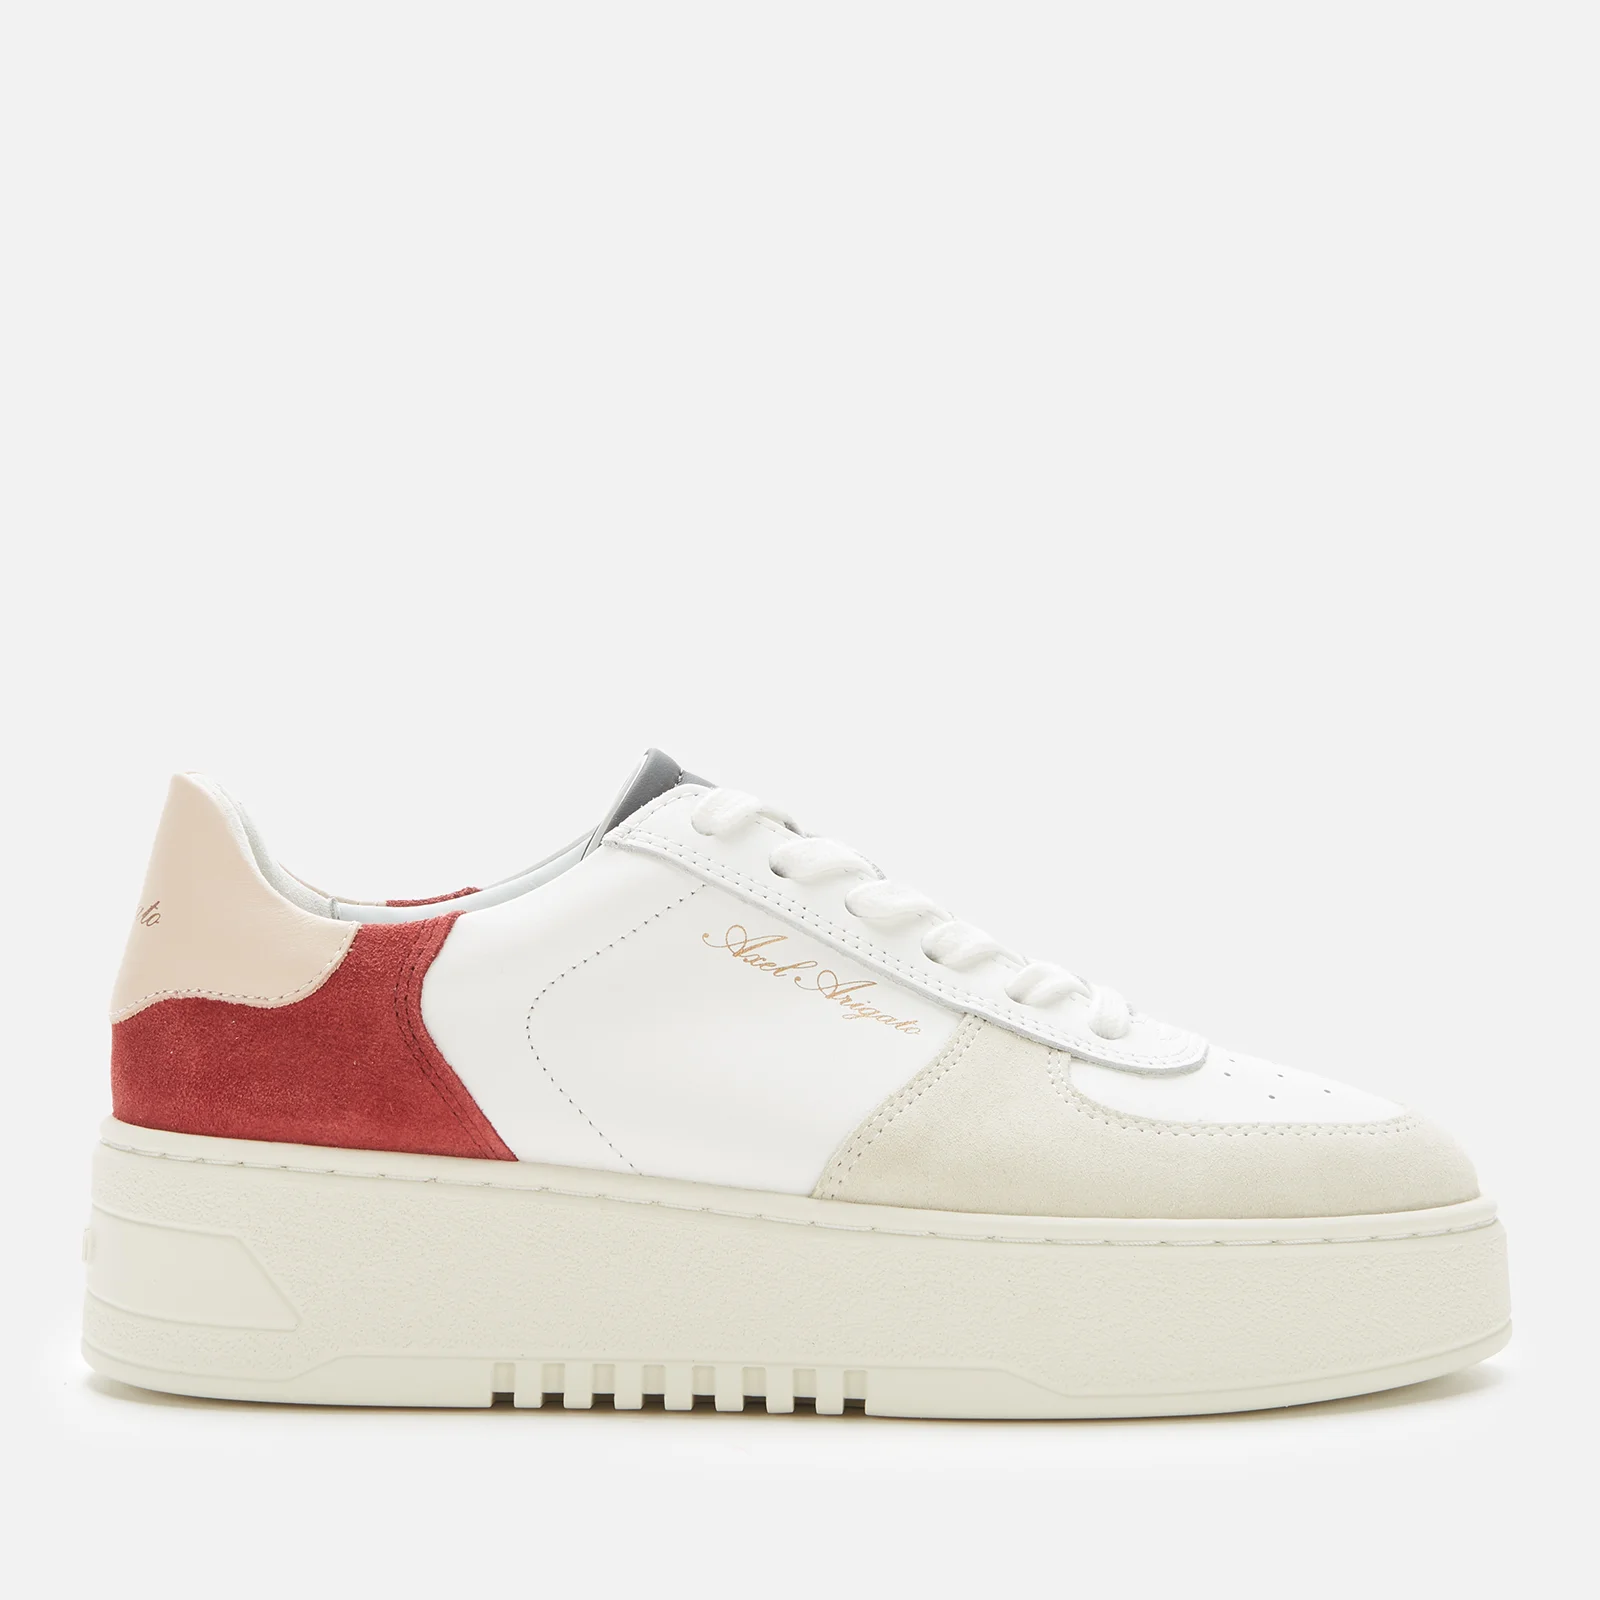 Axel Arigato Women's Orbit Leather/Suede Trainers - White/Red/Dusty Pink Image 1